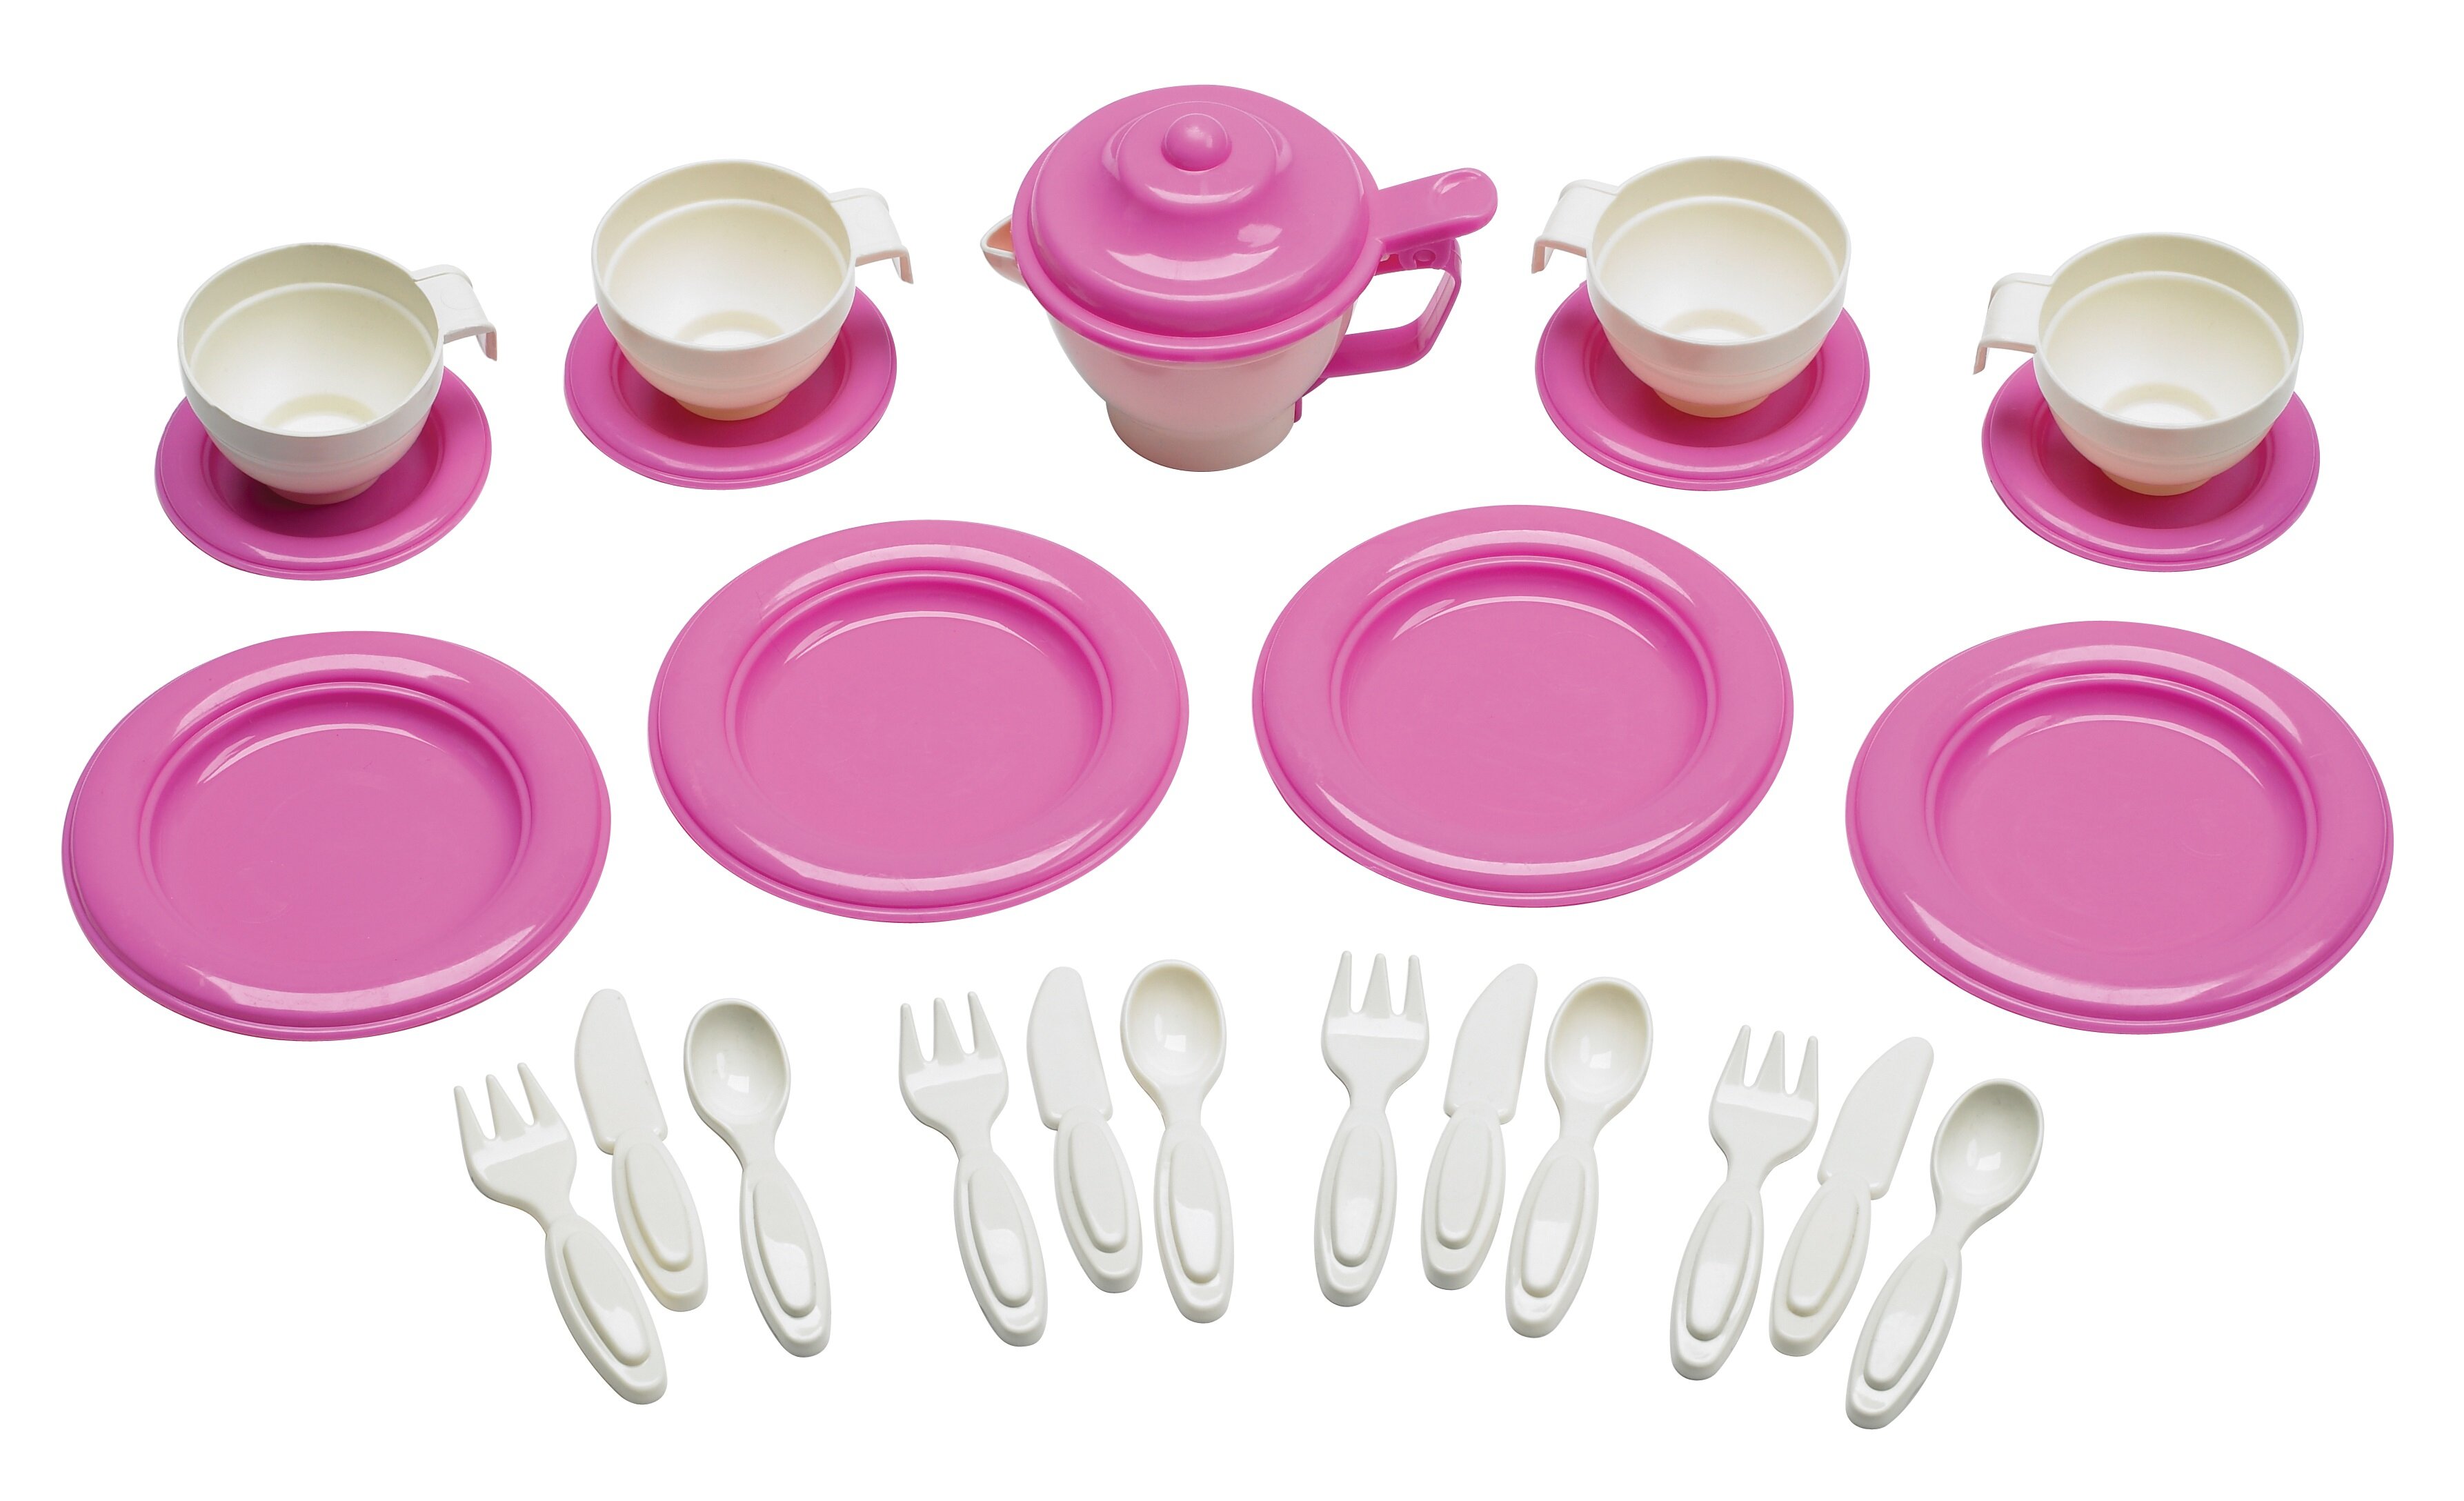 Includes Full Tea and Pastry Set with Cake Stand IQ Toys 39 Piece Tea and Cake Set for Pretend Tea Parties